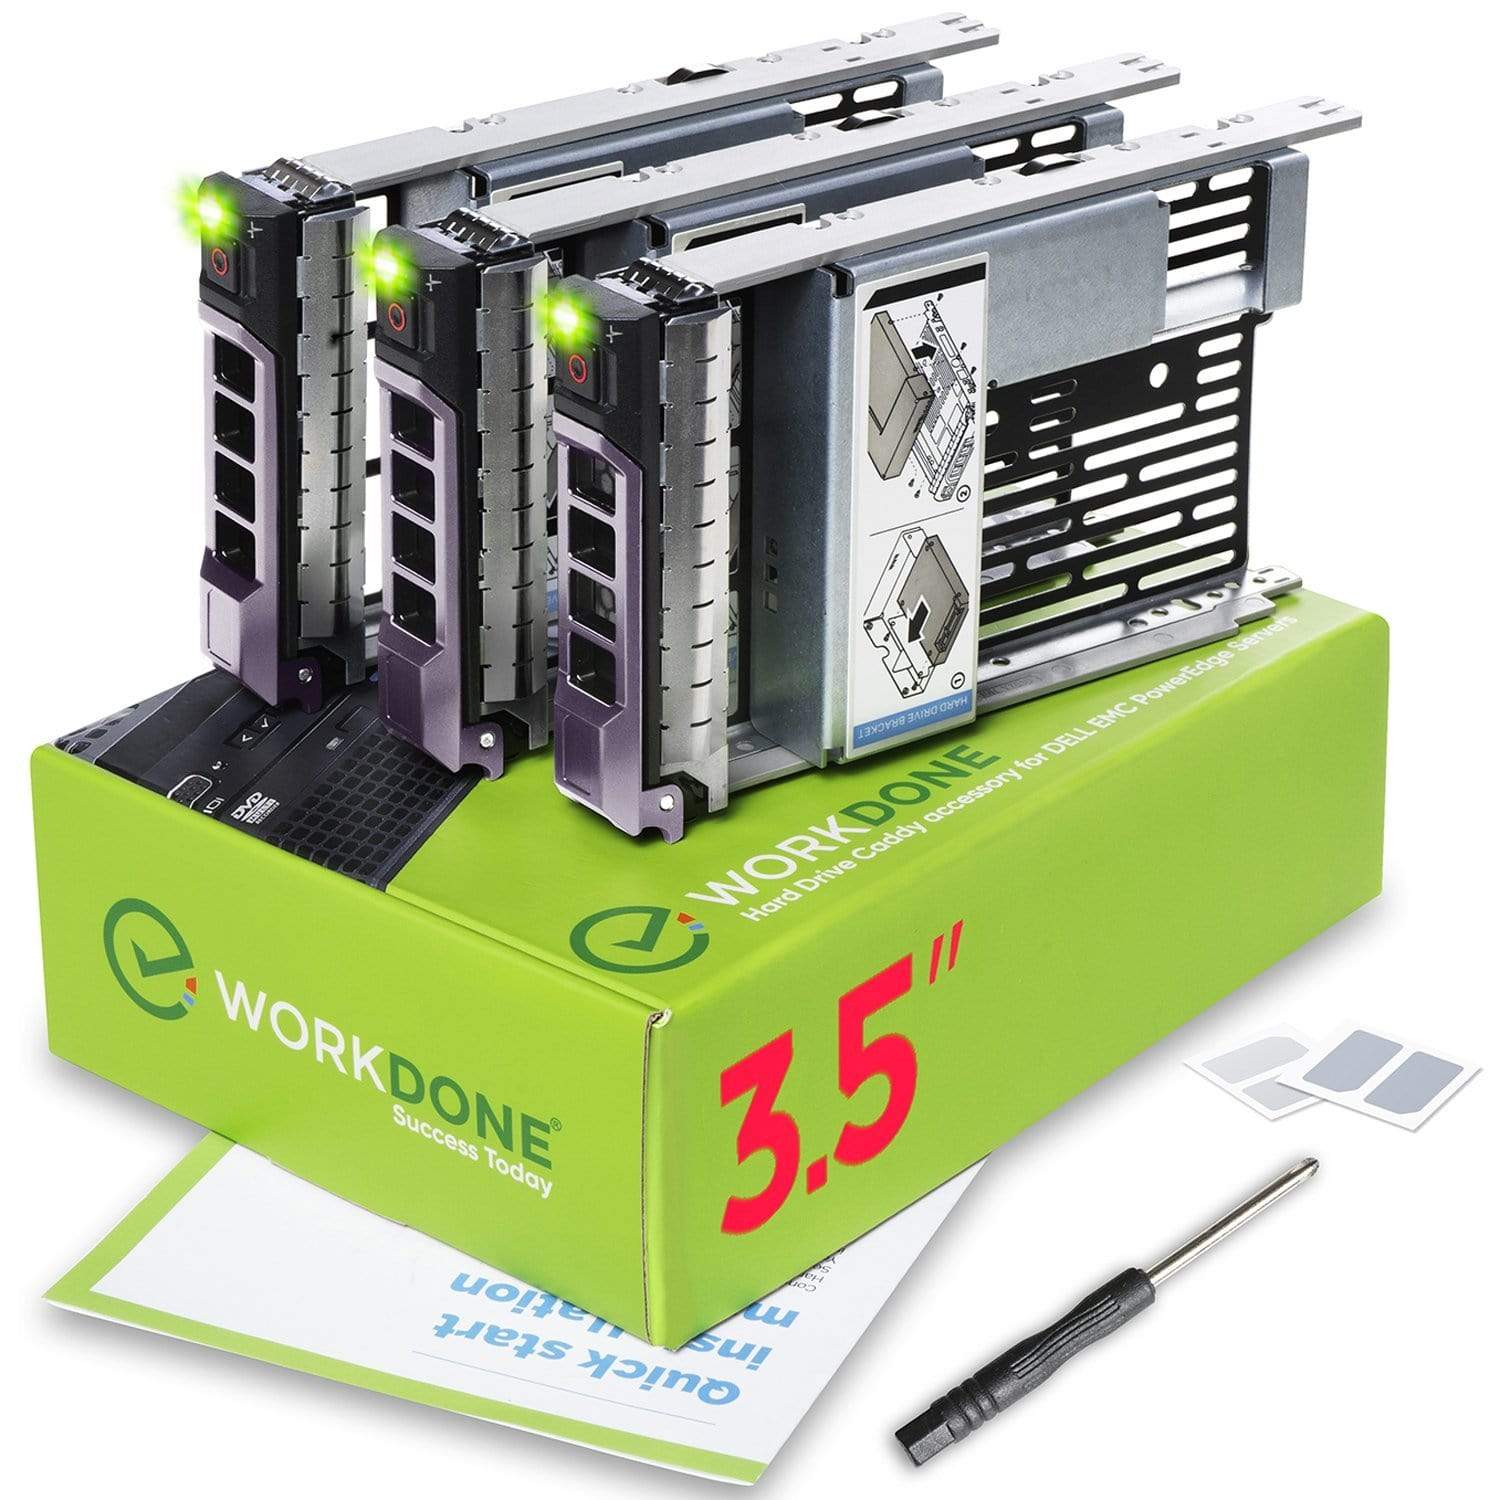 WORKDONE 3-Pack 3.5-inch Hard Drive Caddy 0F238F with 2.5-inch Converter